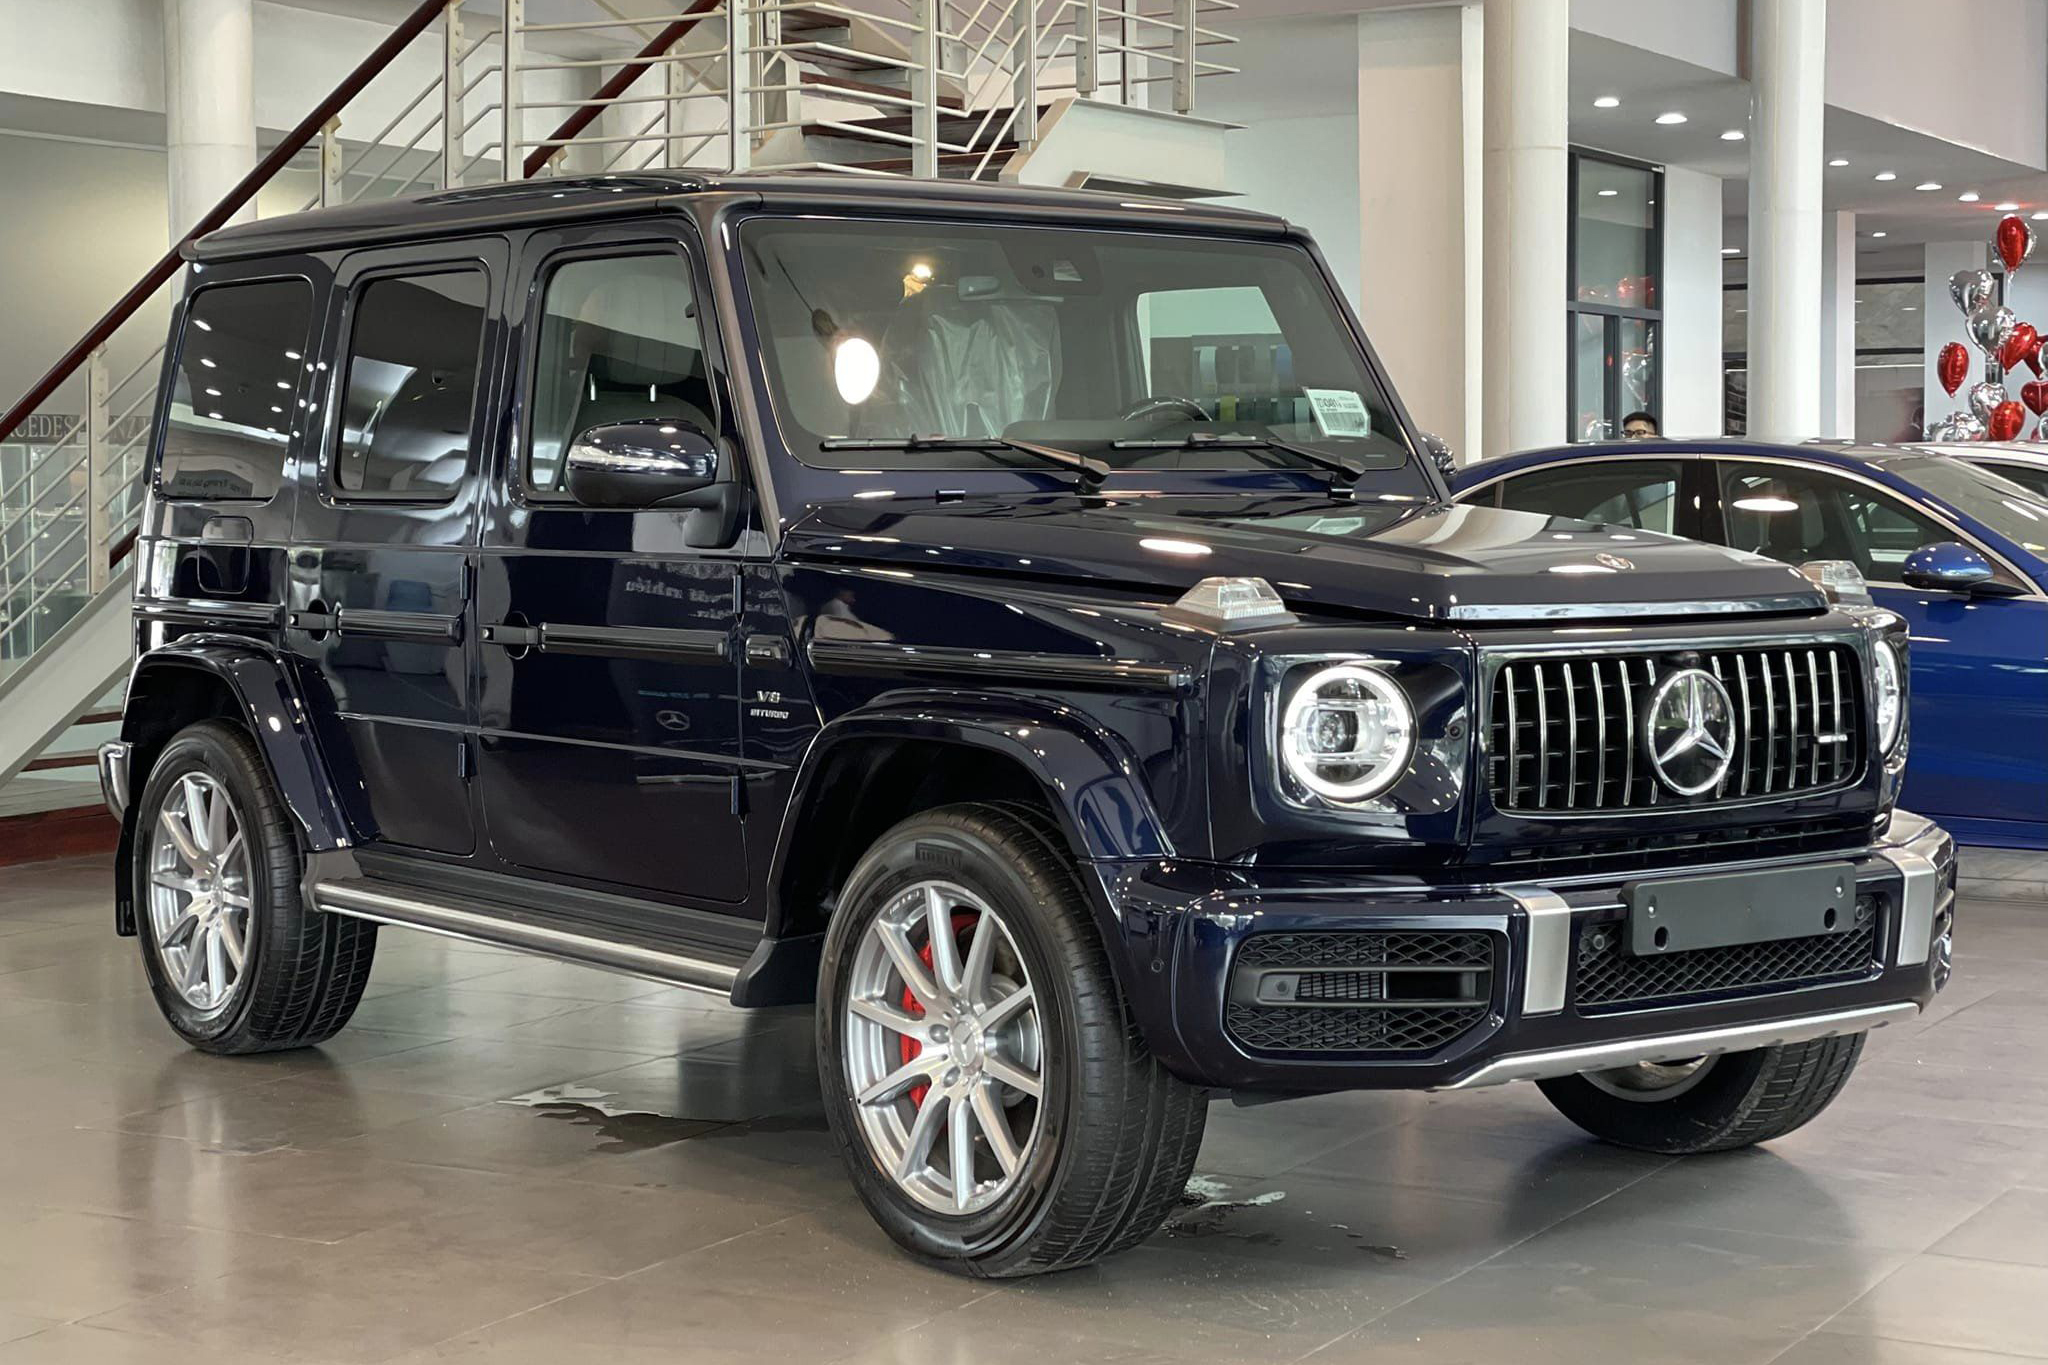 mercedes-amg-g-63-phan-phoi-chinh-hang-cafeautovn-2